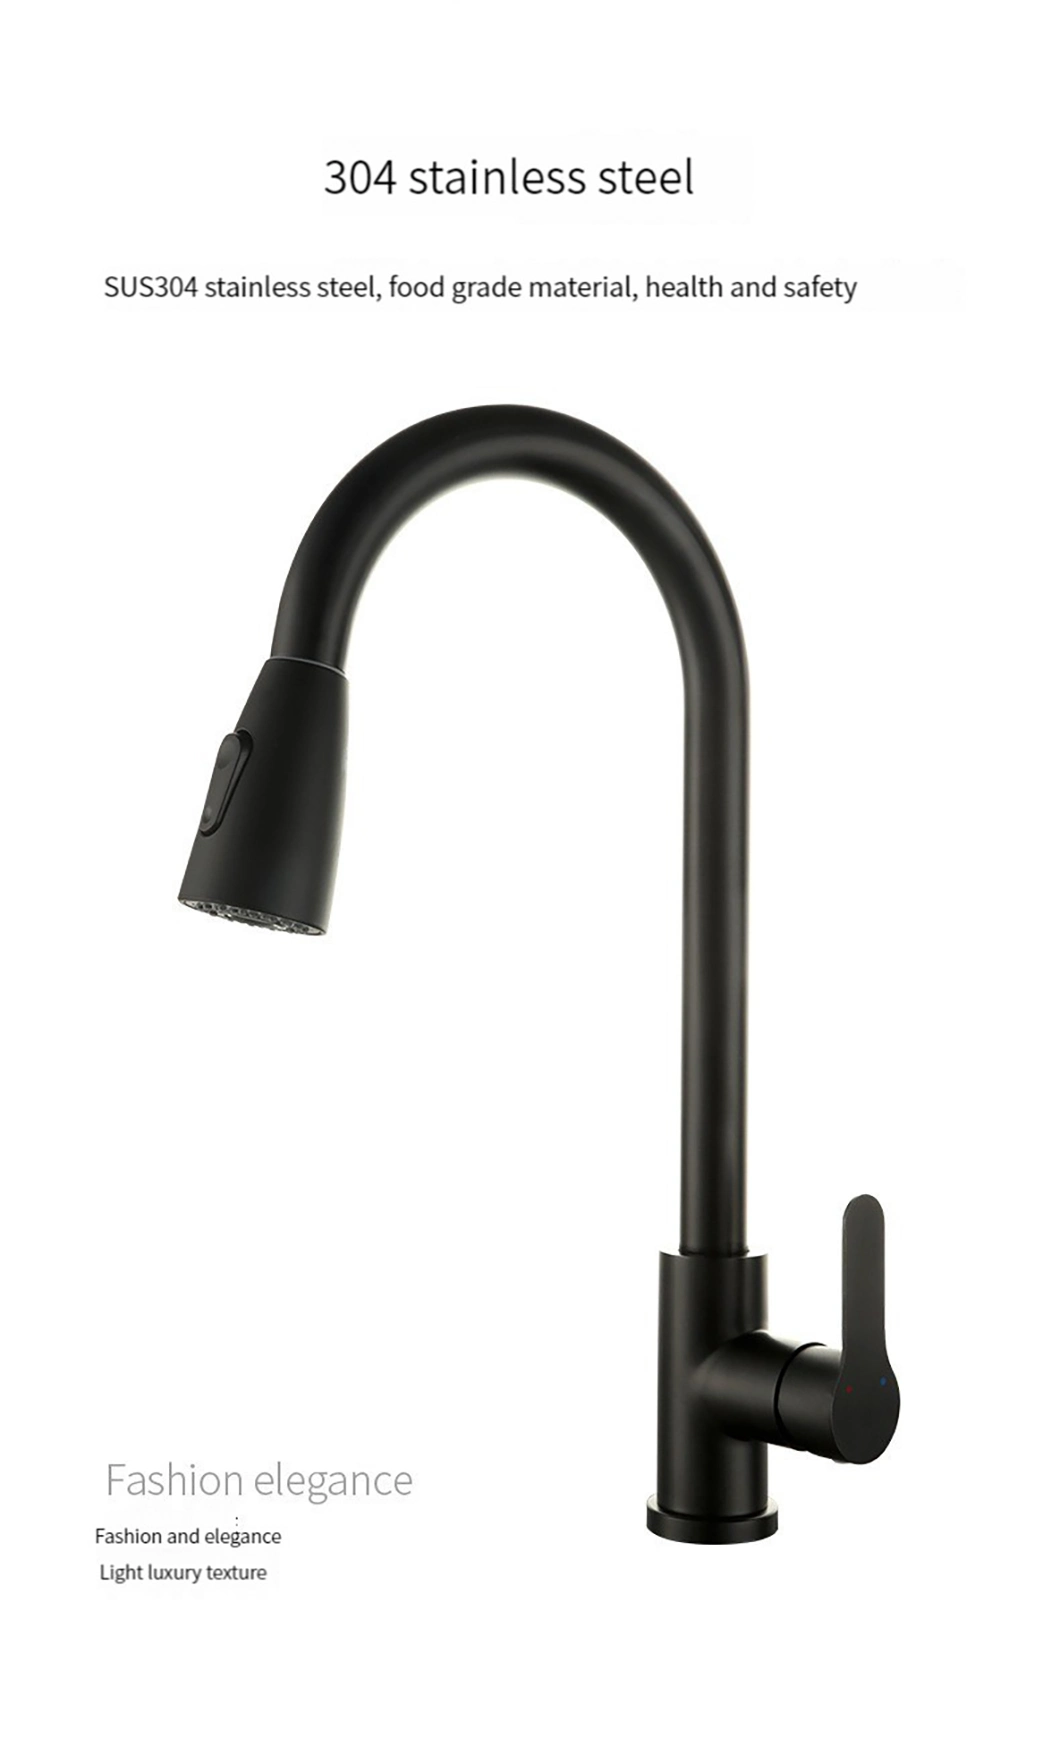 Pull Down Sprayer Kitchen Faucet Black Sink Faucet with Pull out Sprayer Single Hole and 3 Hole Deck Mount Single Handle Copper Kithen Faucet